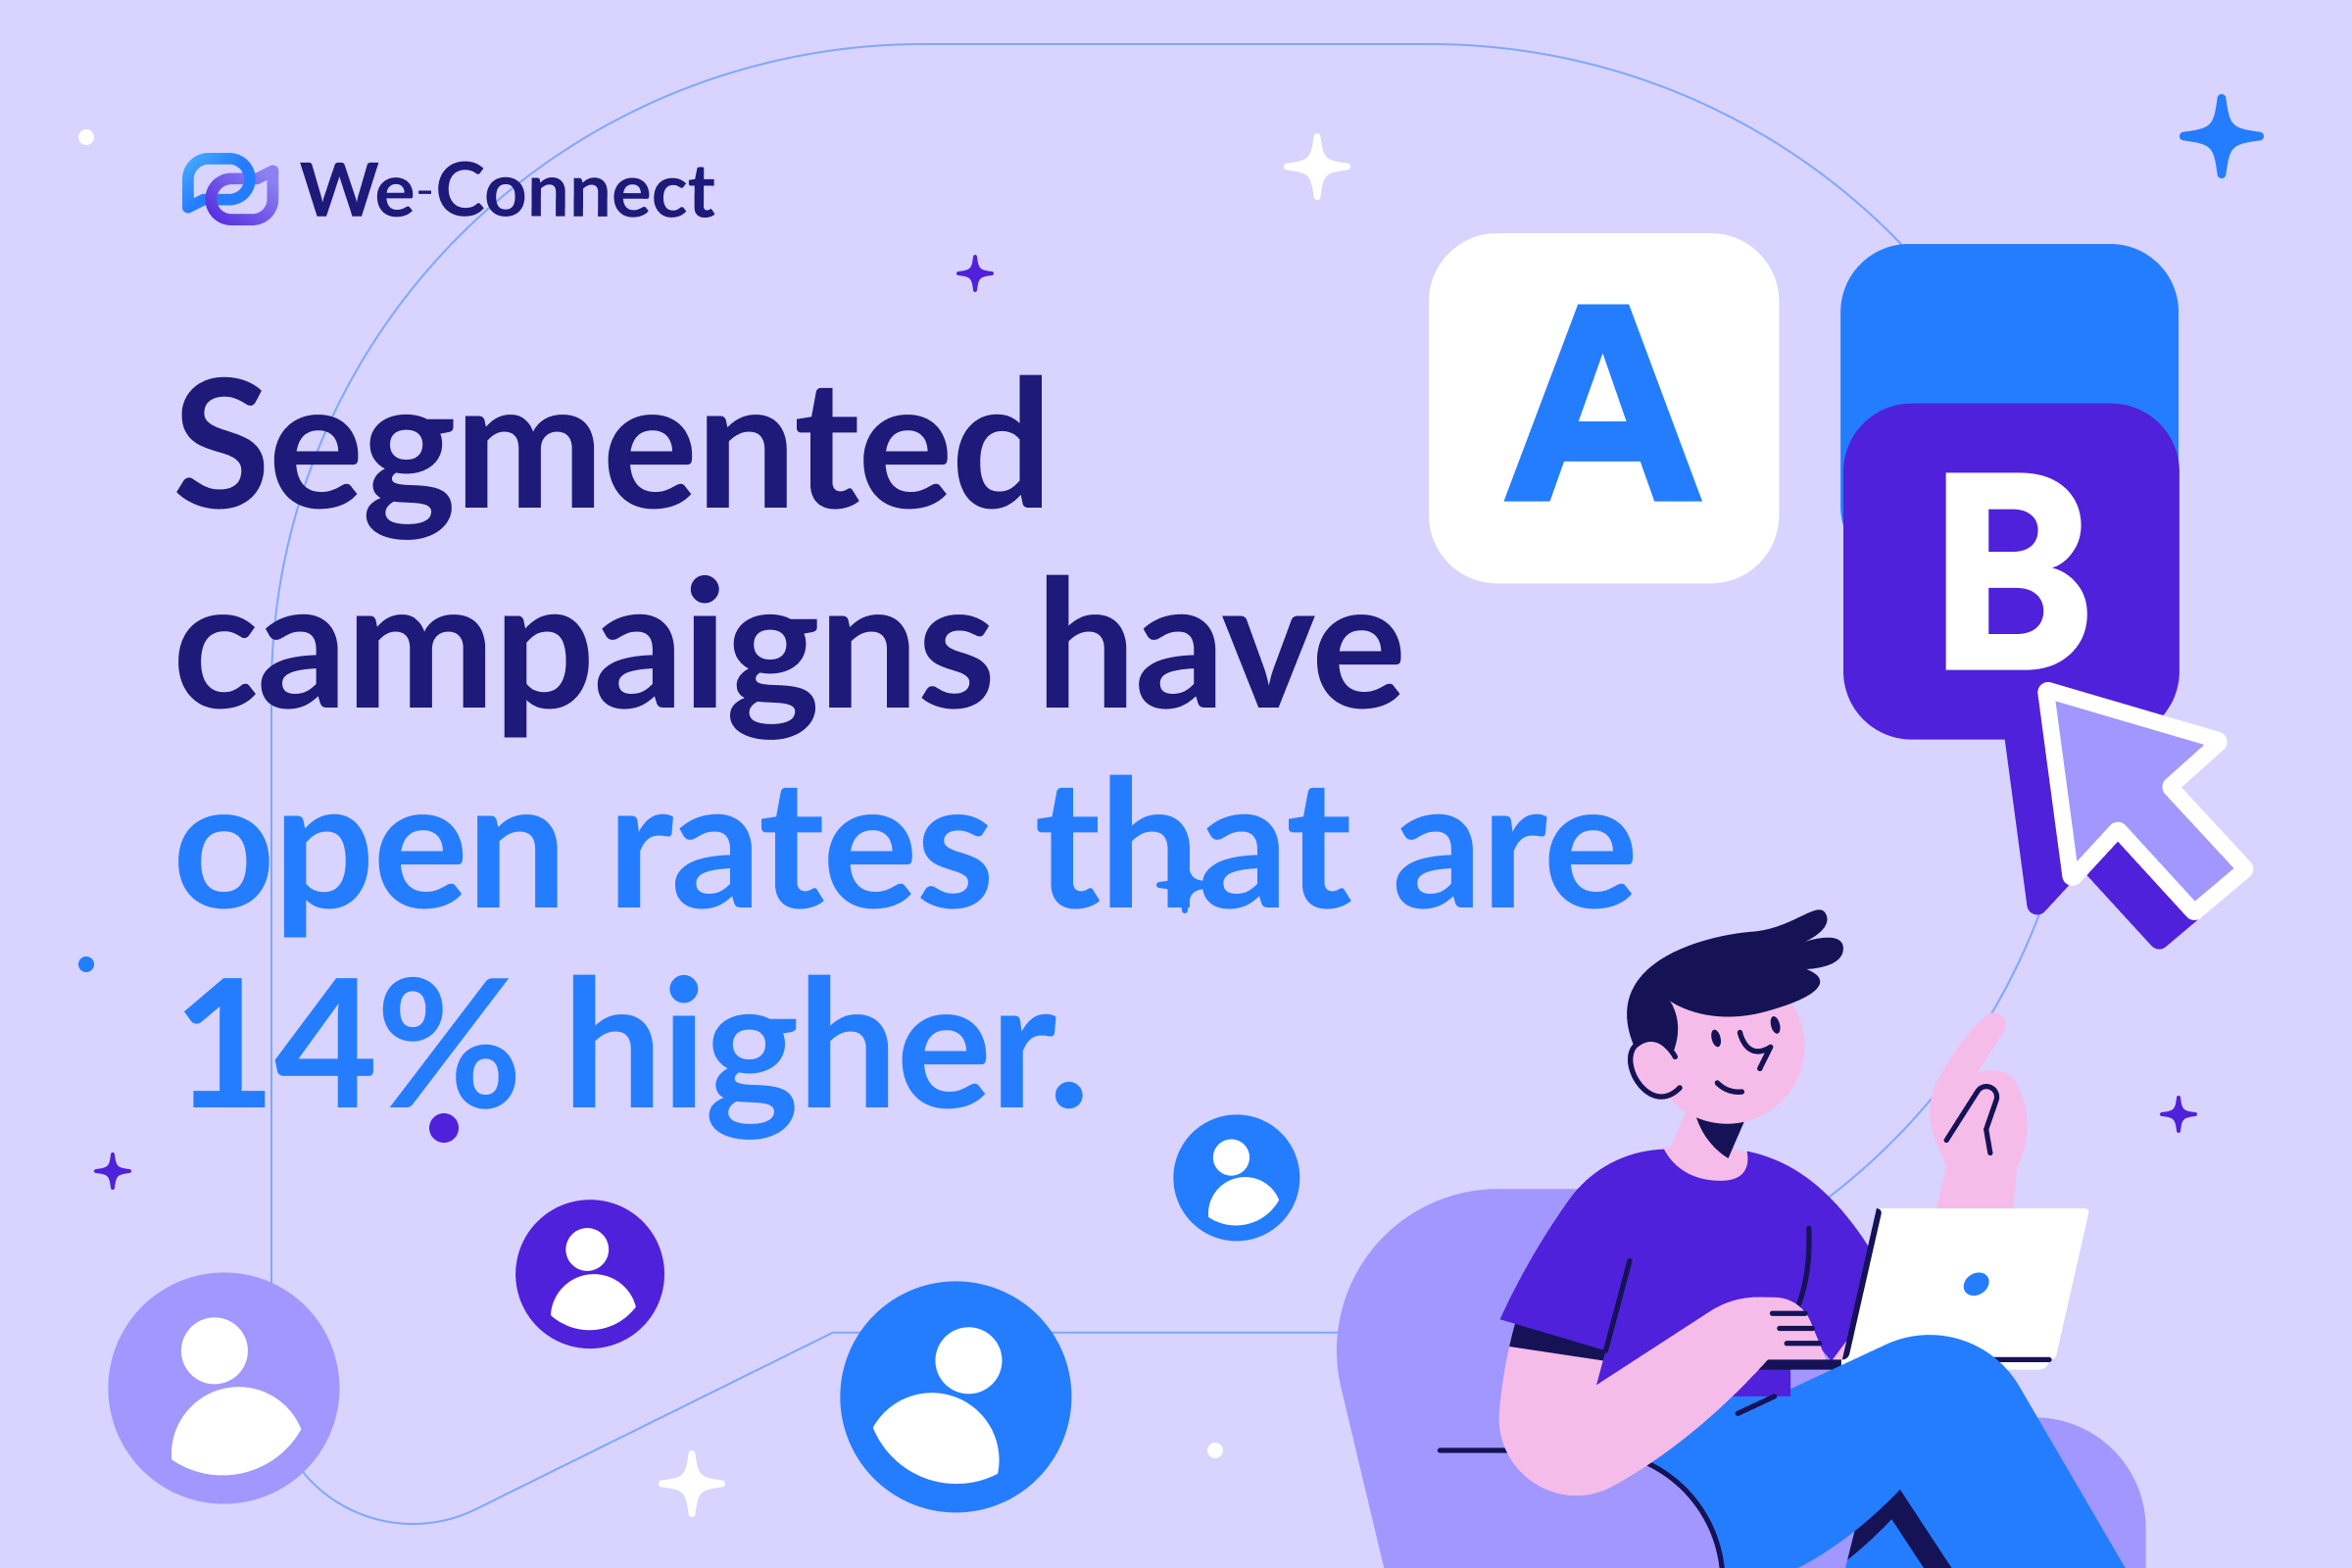 Segmented campaigns have open rates that are 14% higher